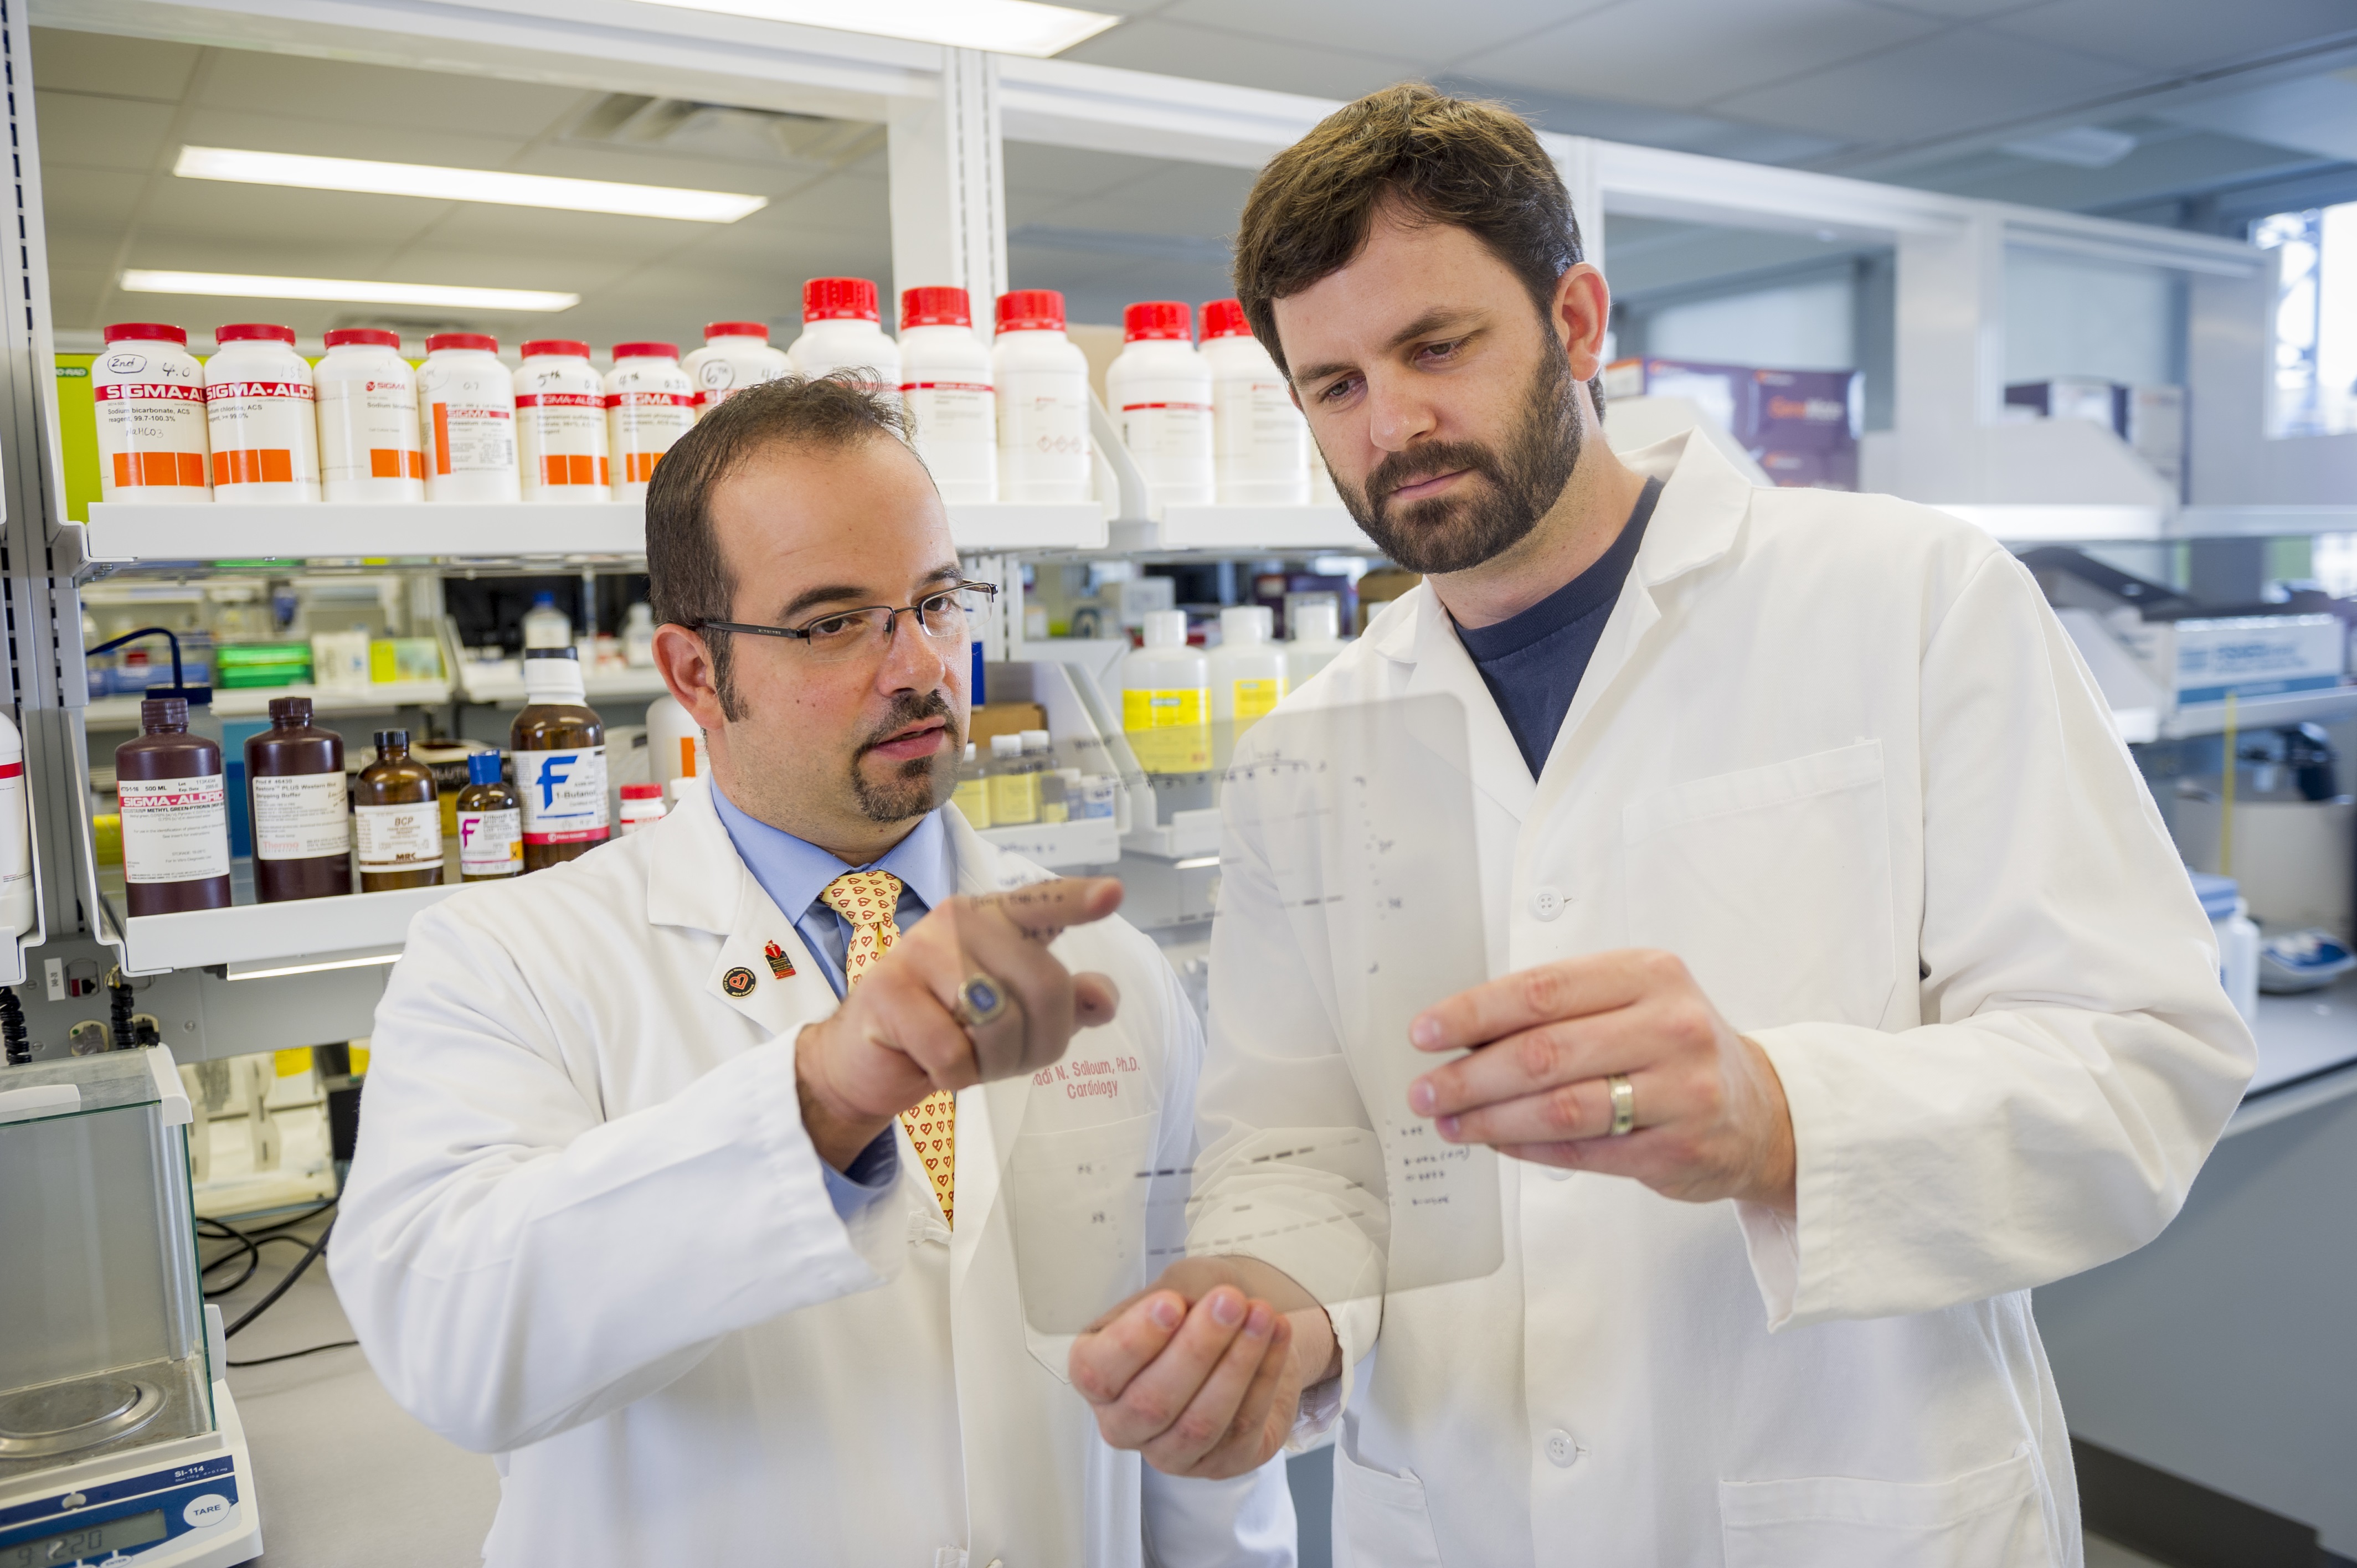 Fadi Salloum, Ph.D., (left) in the lab with David Durrant, Ph.D., (right) a former graduate student from the Department of Biochemistry and Molecular Biology. Photo courtesy of VCU Health Pauley Heart Center.